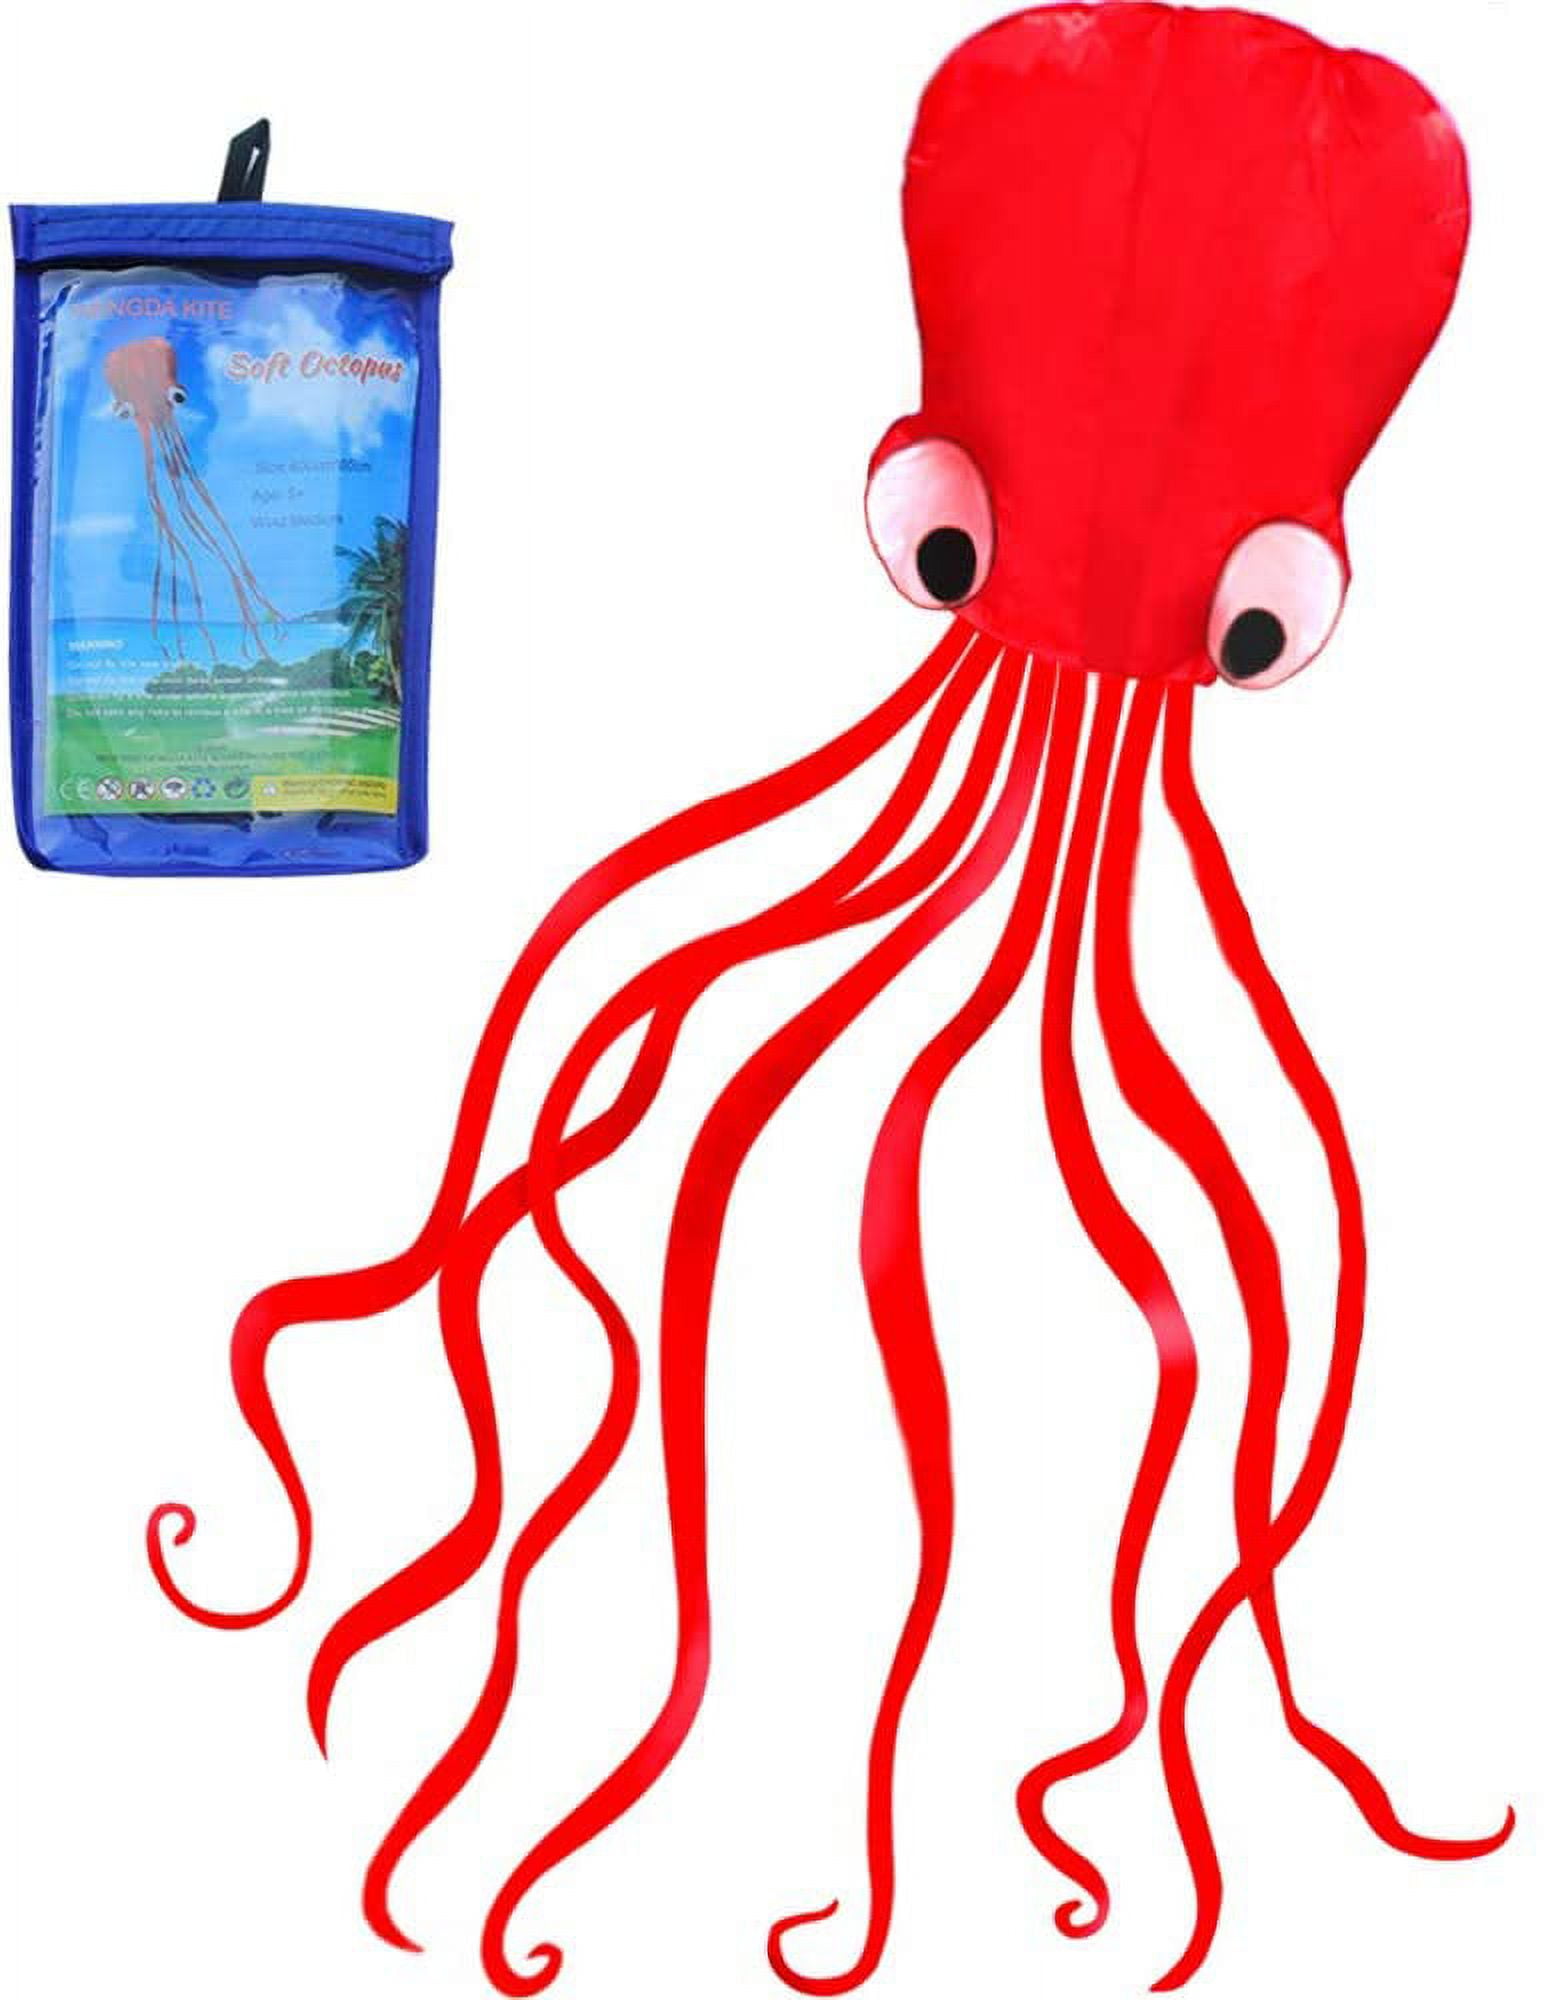 Hengda Kite Software Octopus Flyer Kite With Long Colorful Tail